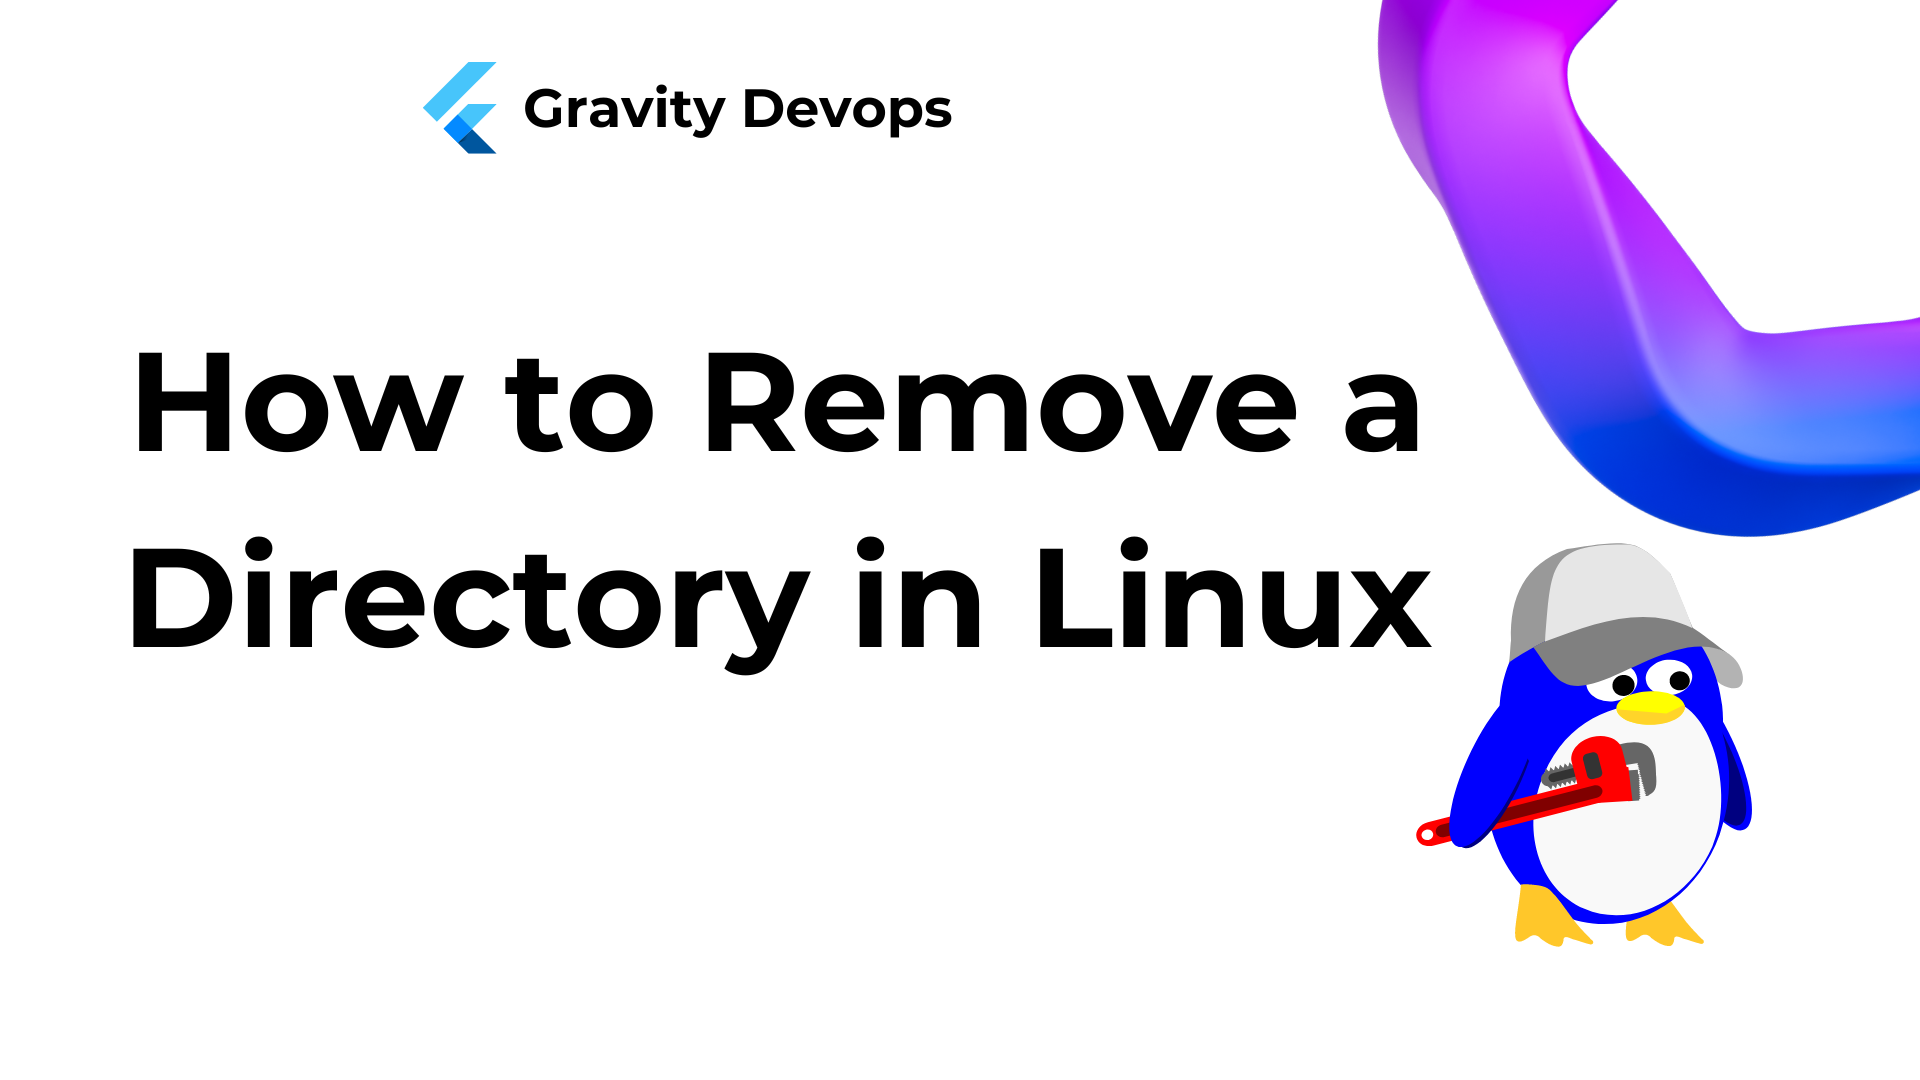 How to Remove a Directory in Linux